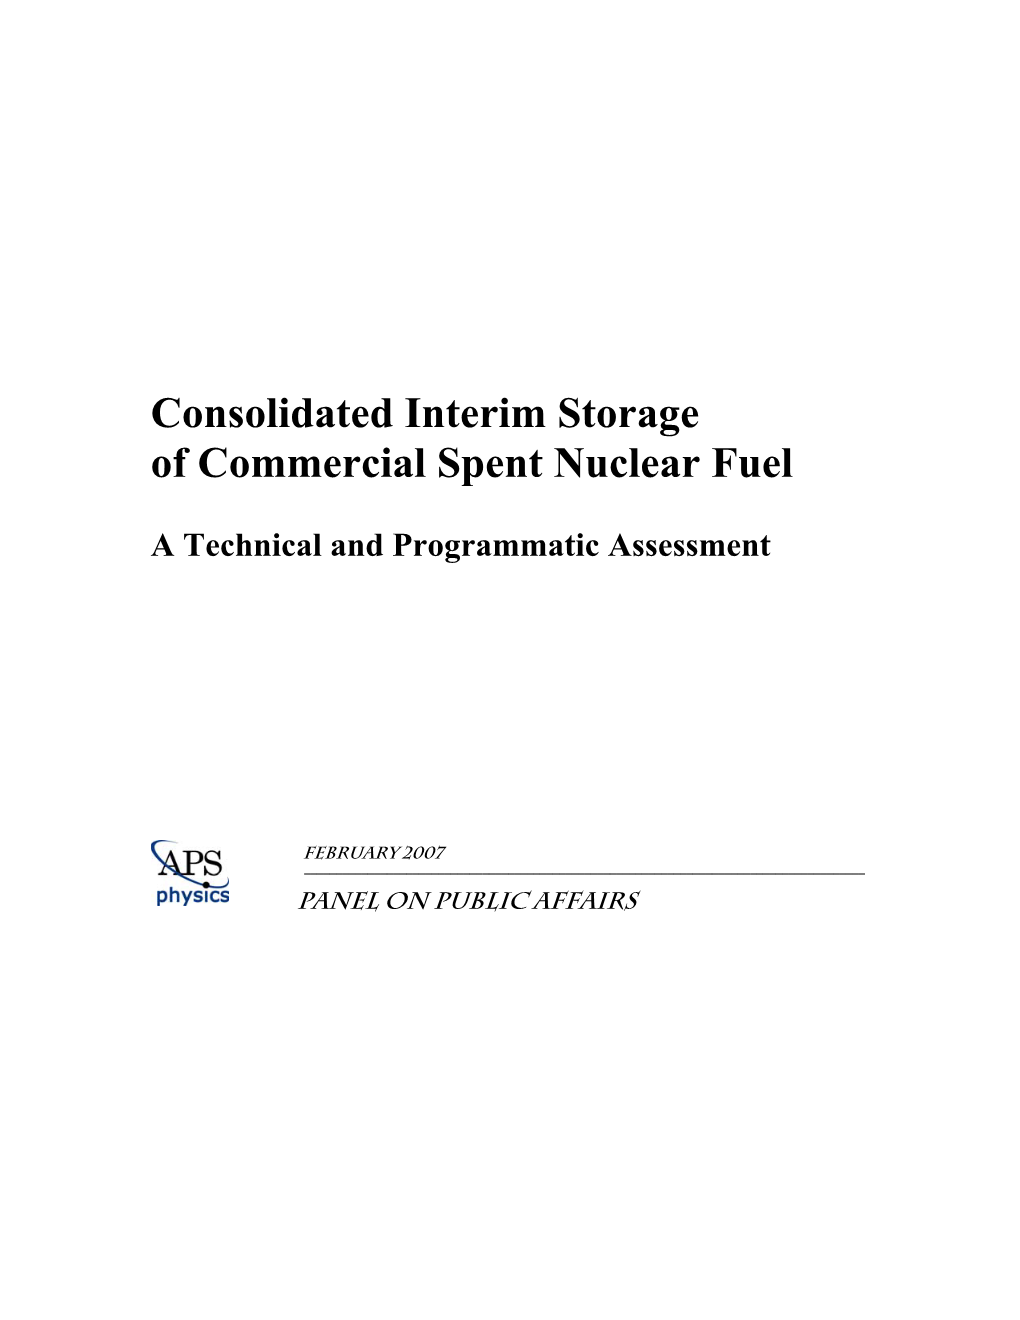 Consolidated Interim Storage of Commercial Spent Nuclear Fuel